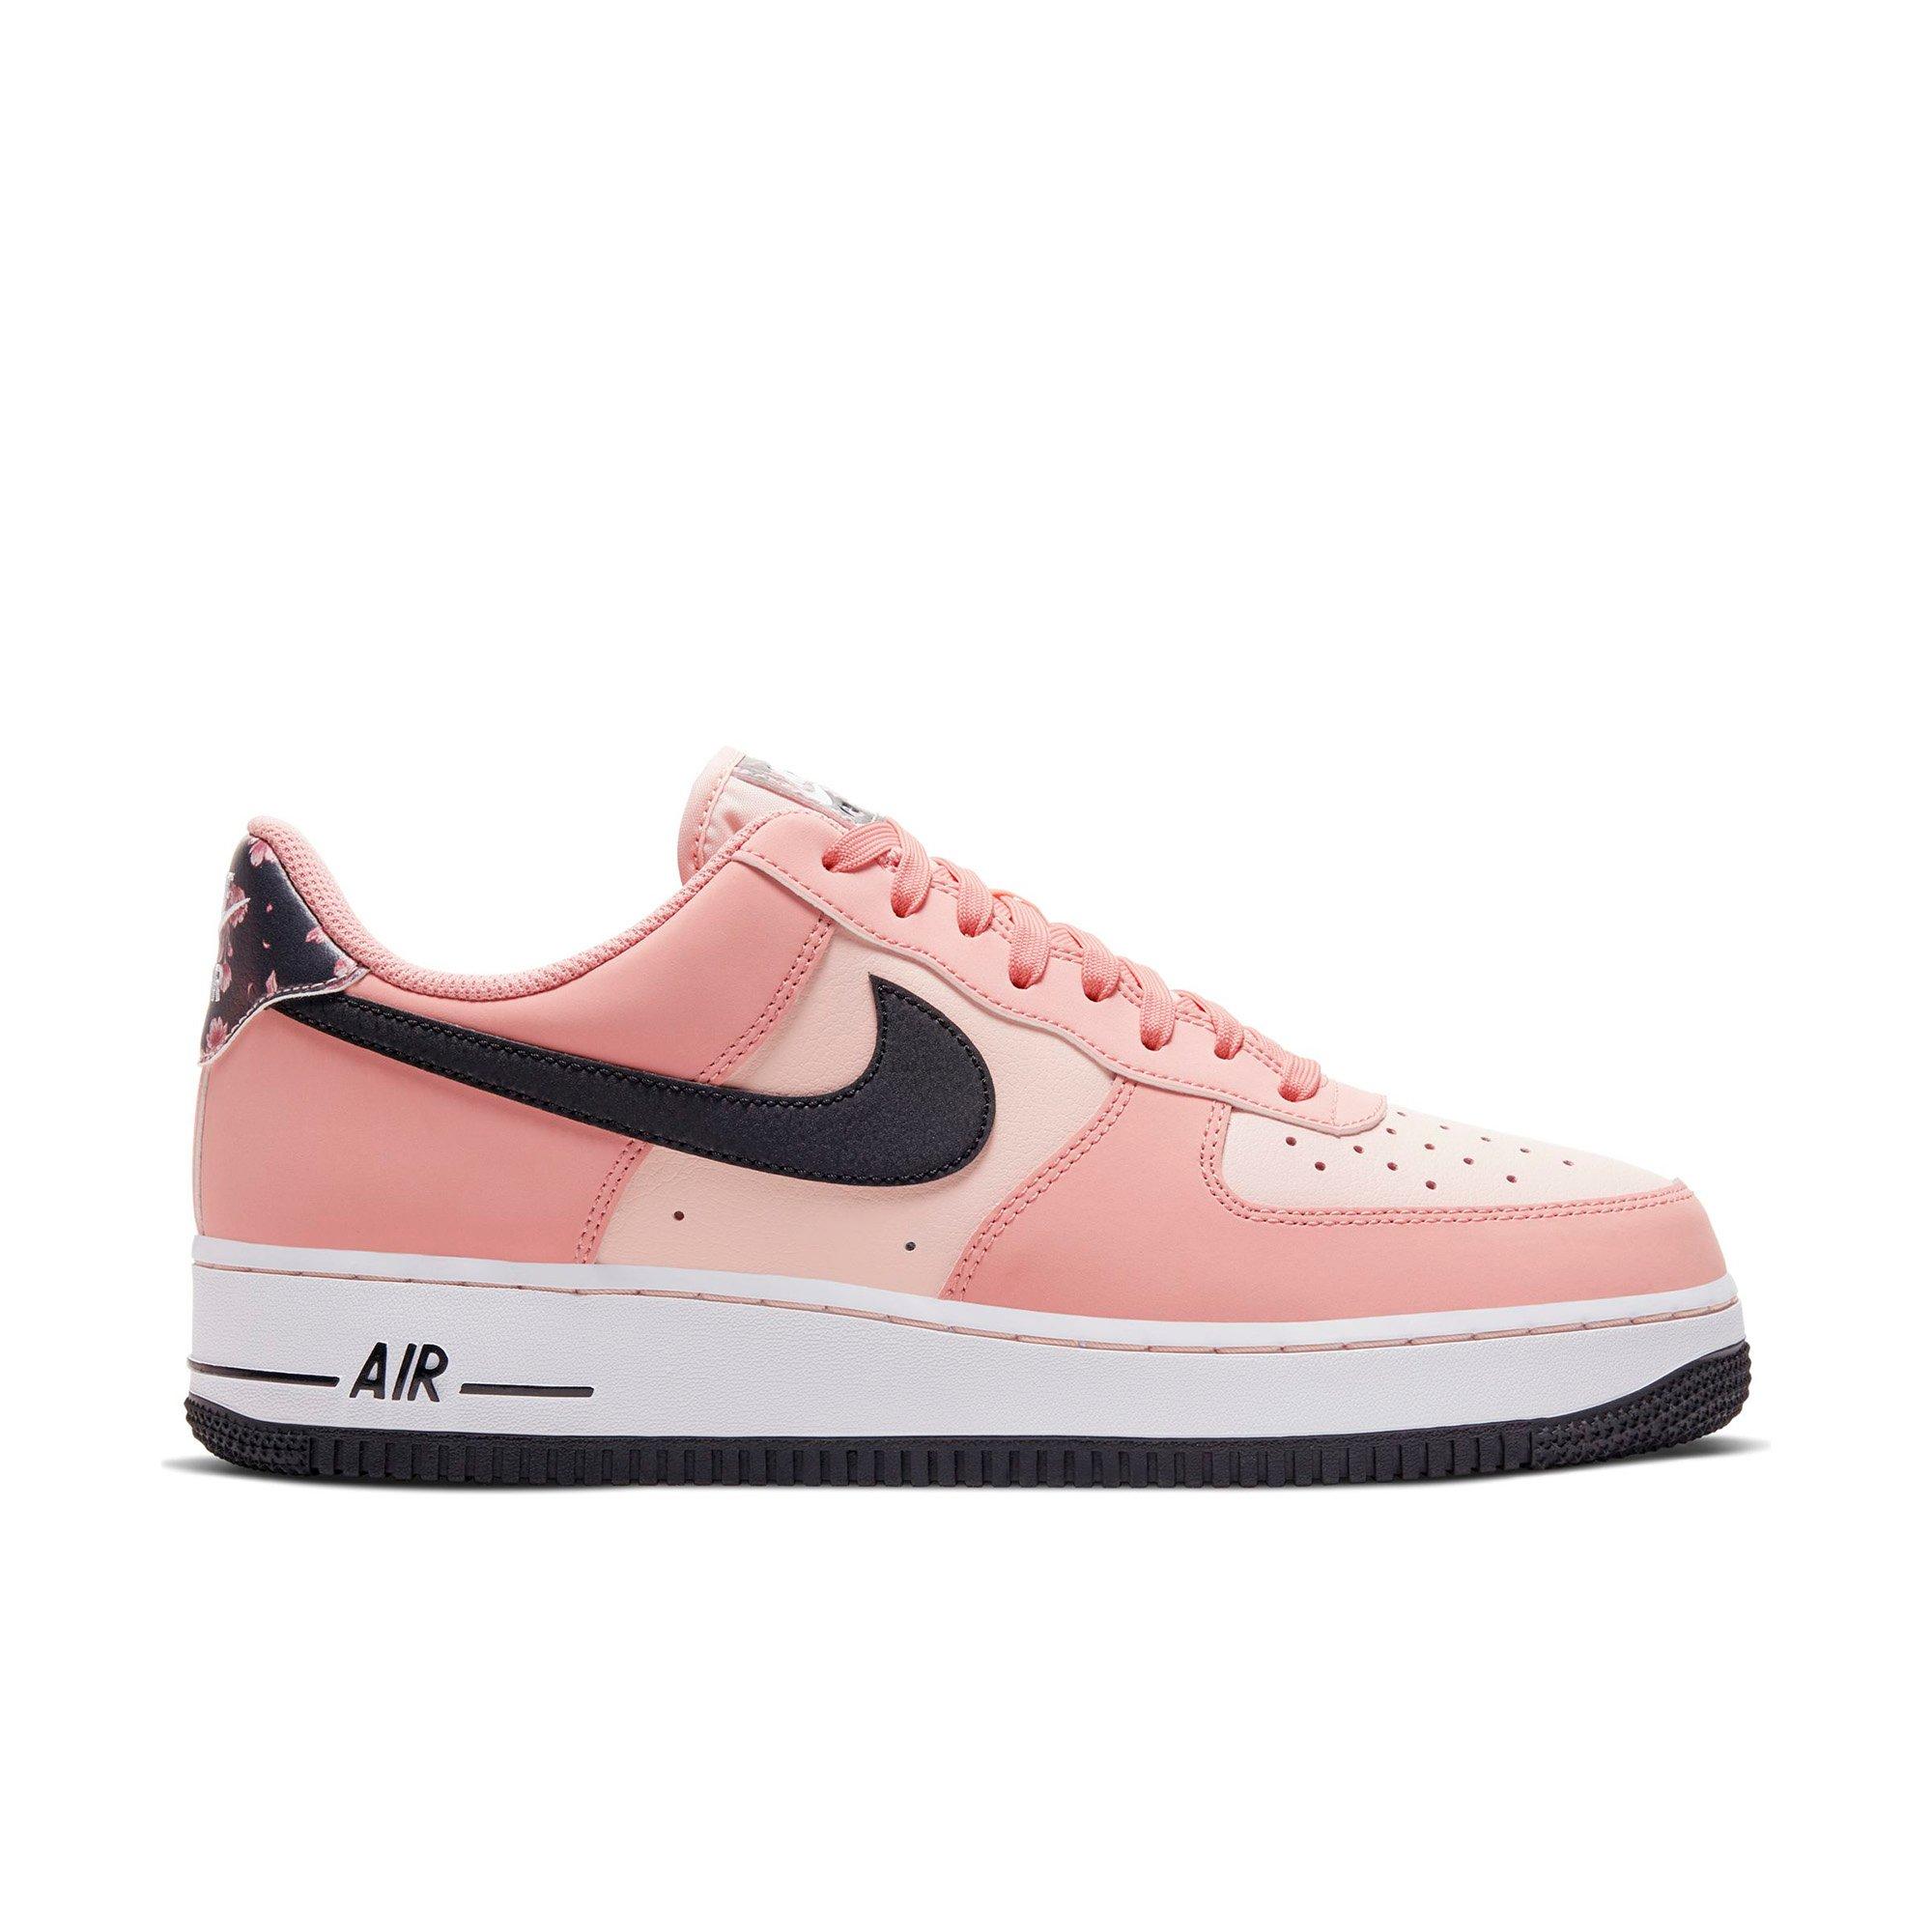 Nike Air Force 1 '07 Limited Edition 